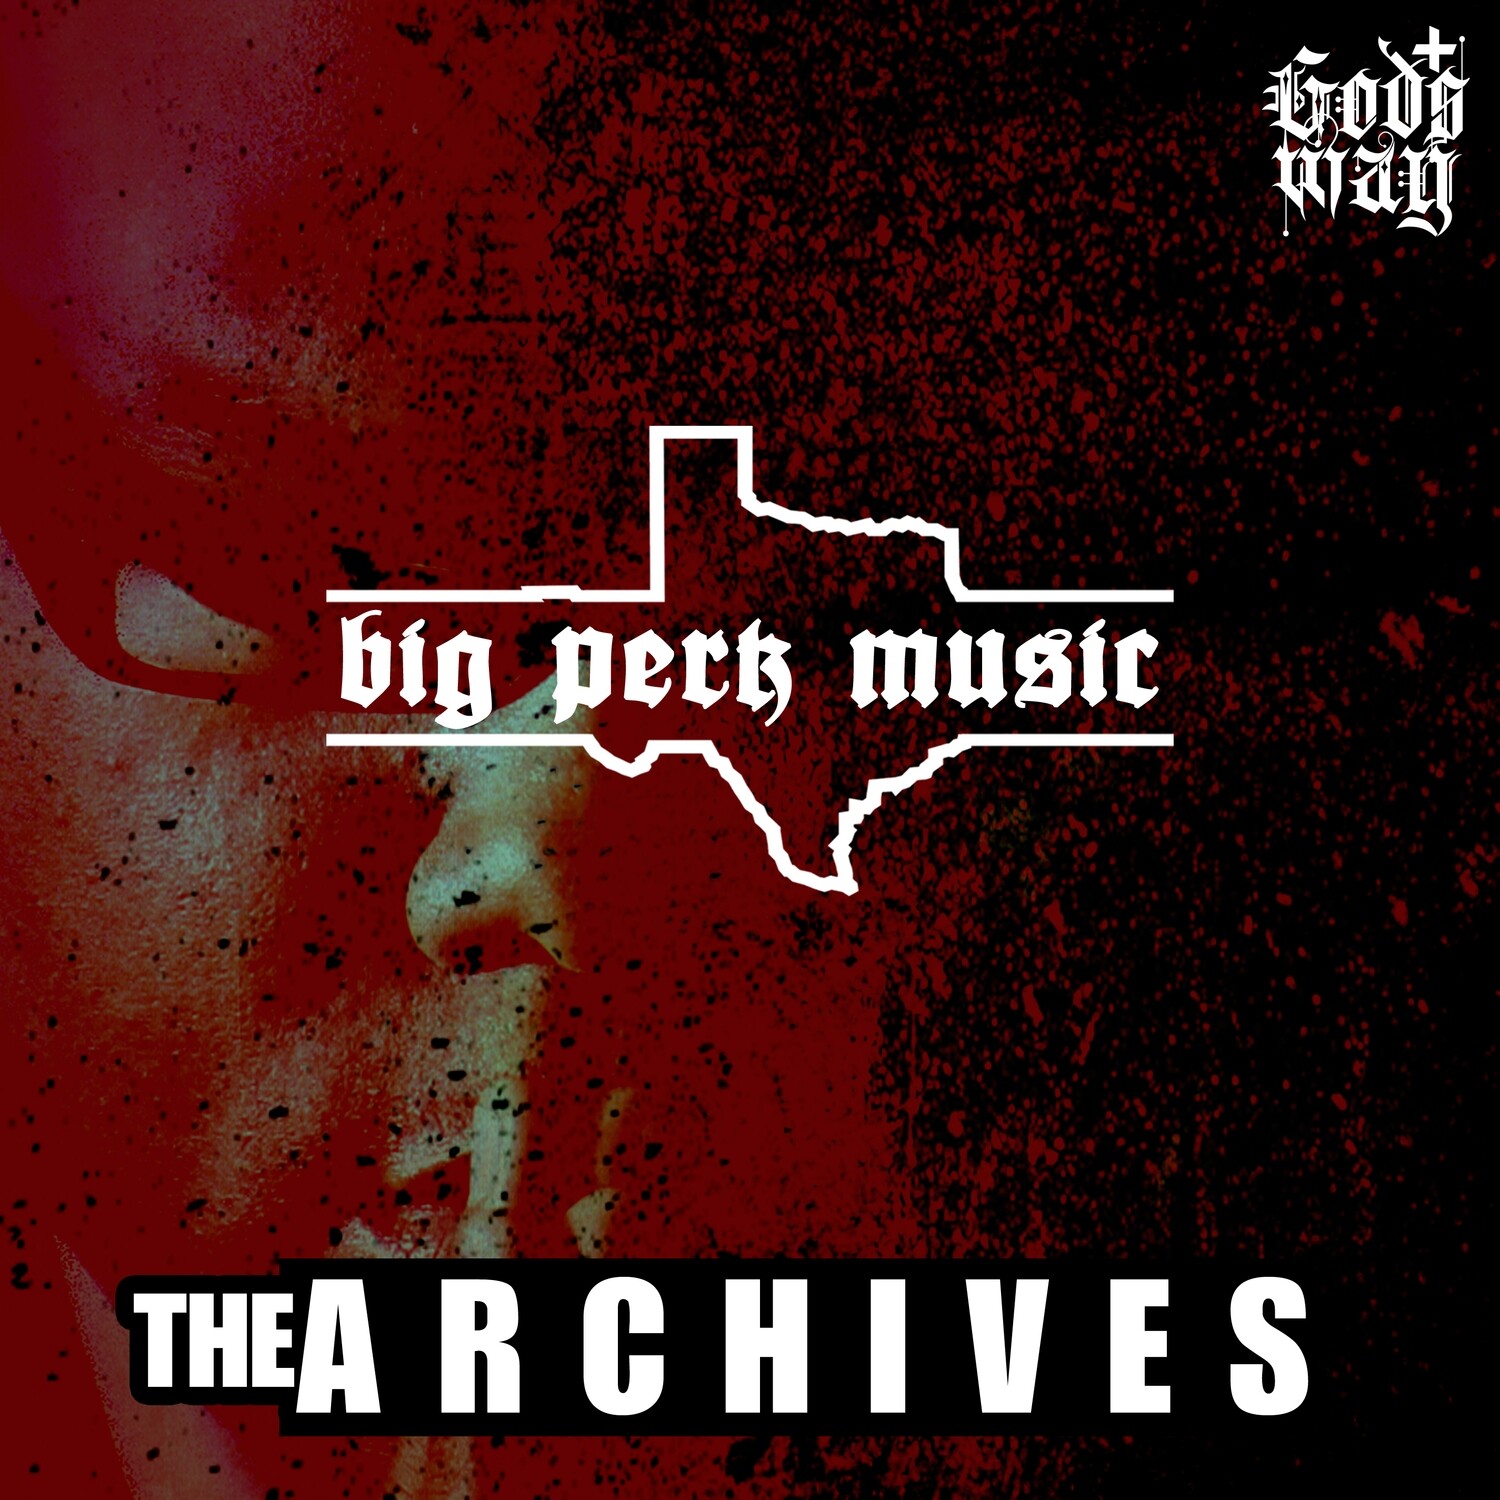 Big Perk Music - The Archives